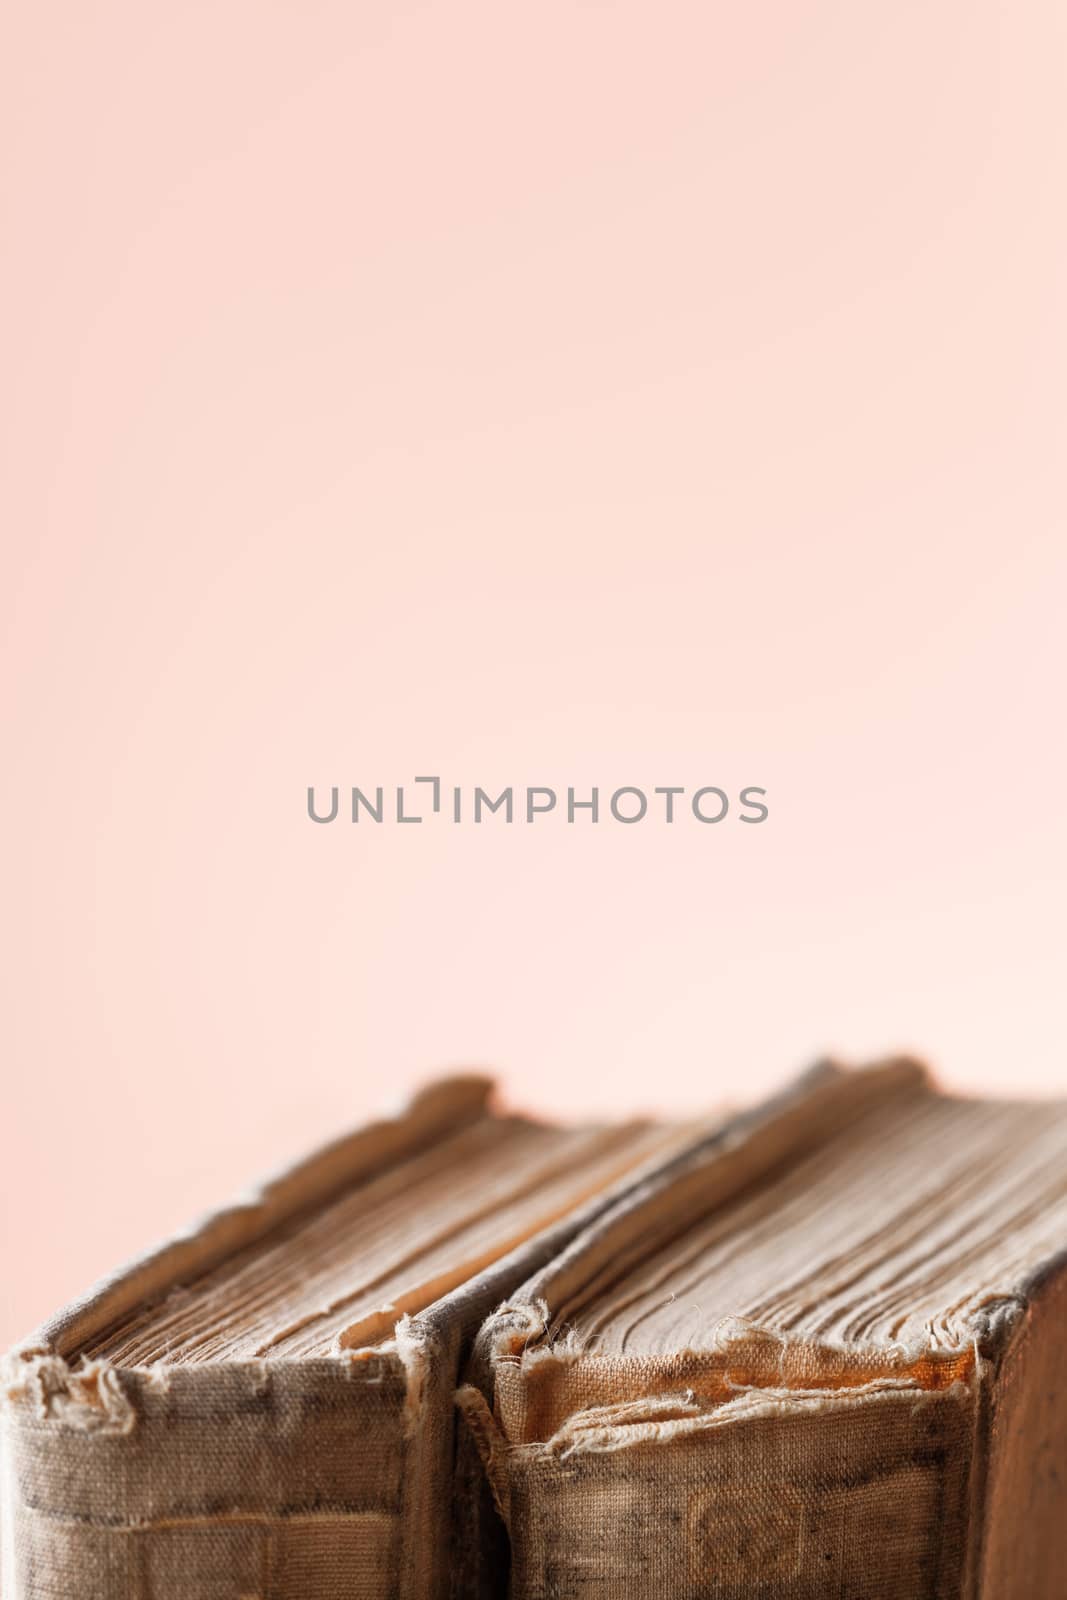 Banner with two old books. Books with shabby covers and ragged pages on light pink background with copy space.